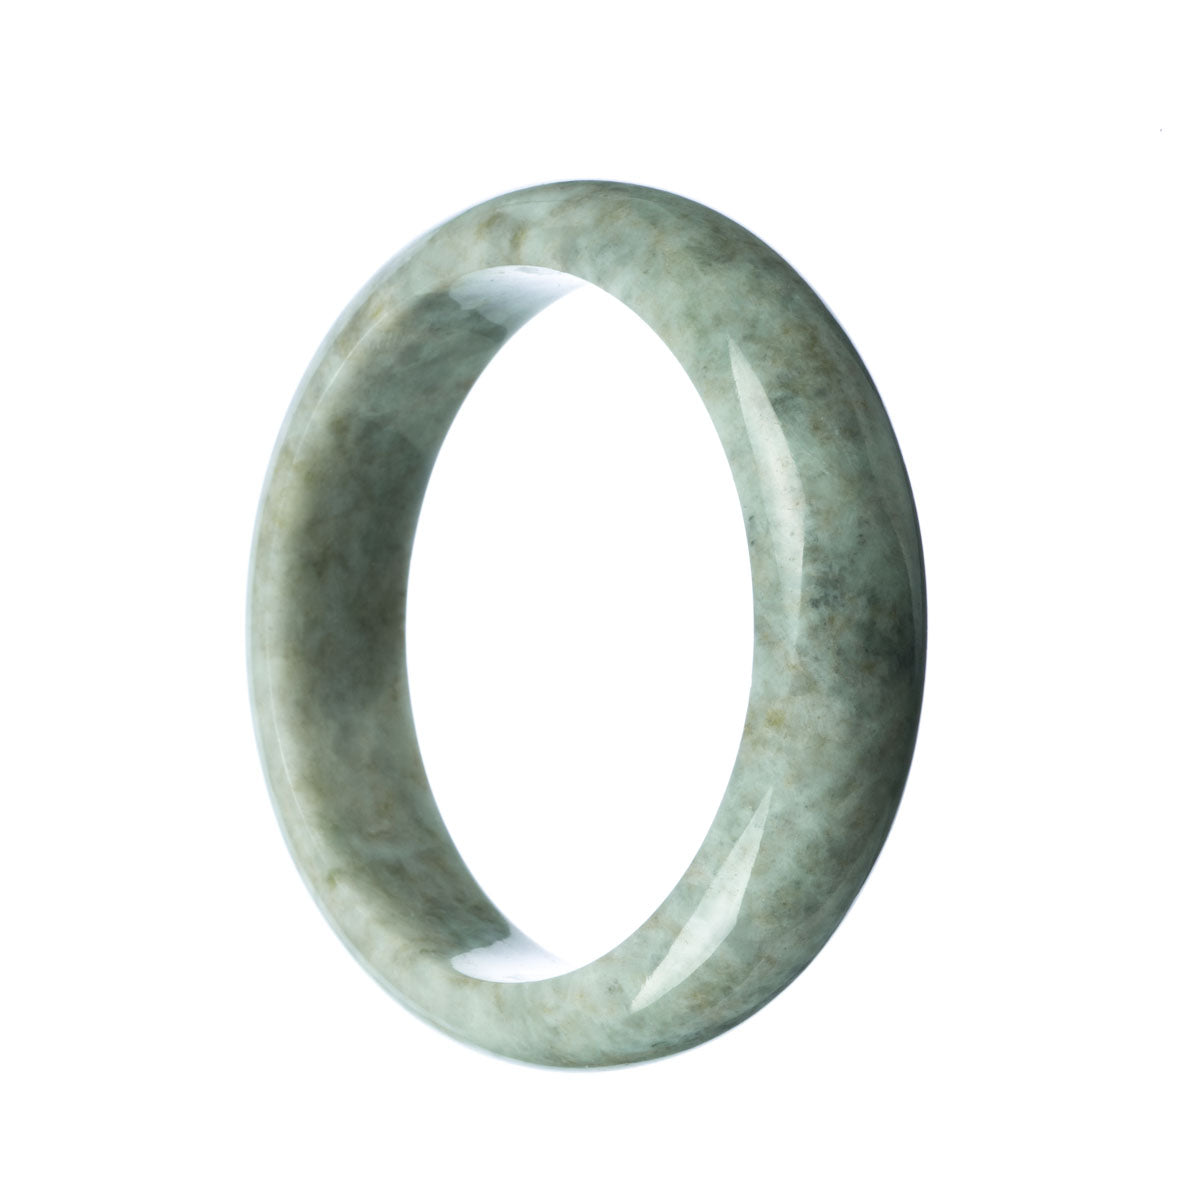 A grey half moon shaped traditional jade bangle, measuring 63mm in diameter, with a genuine untreated finish.